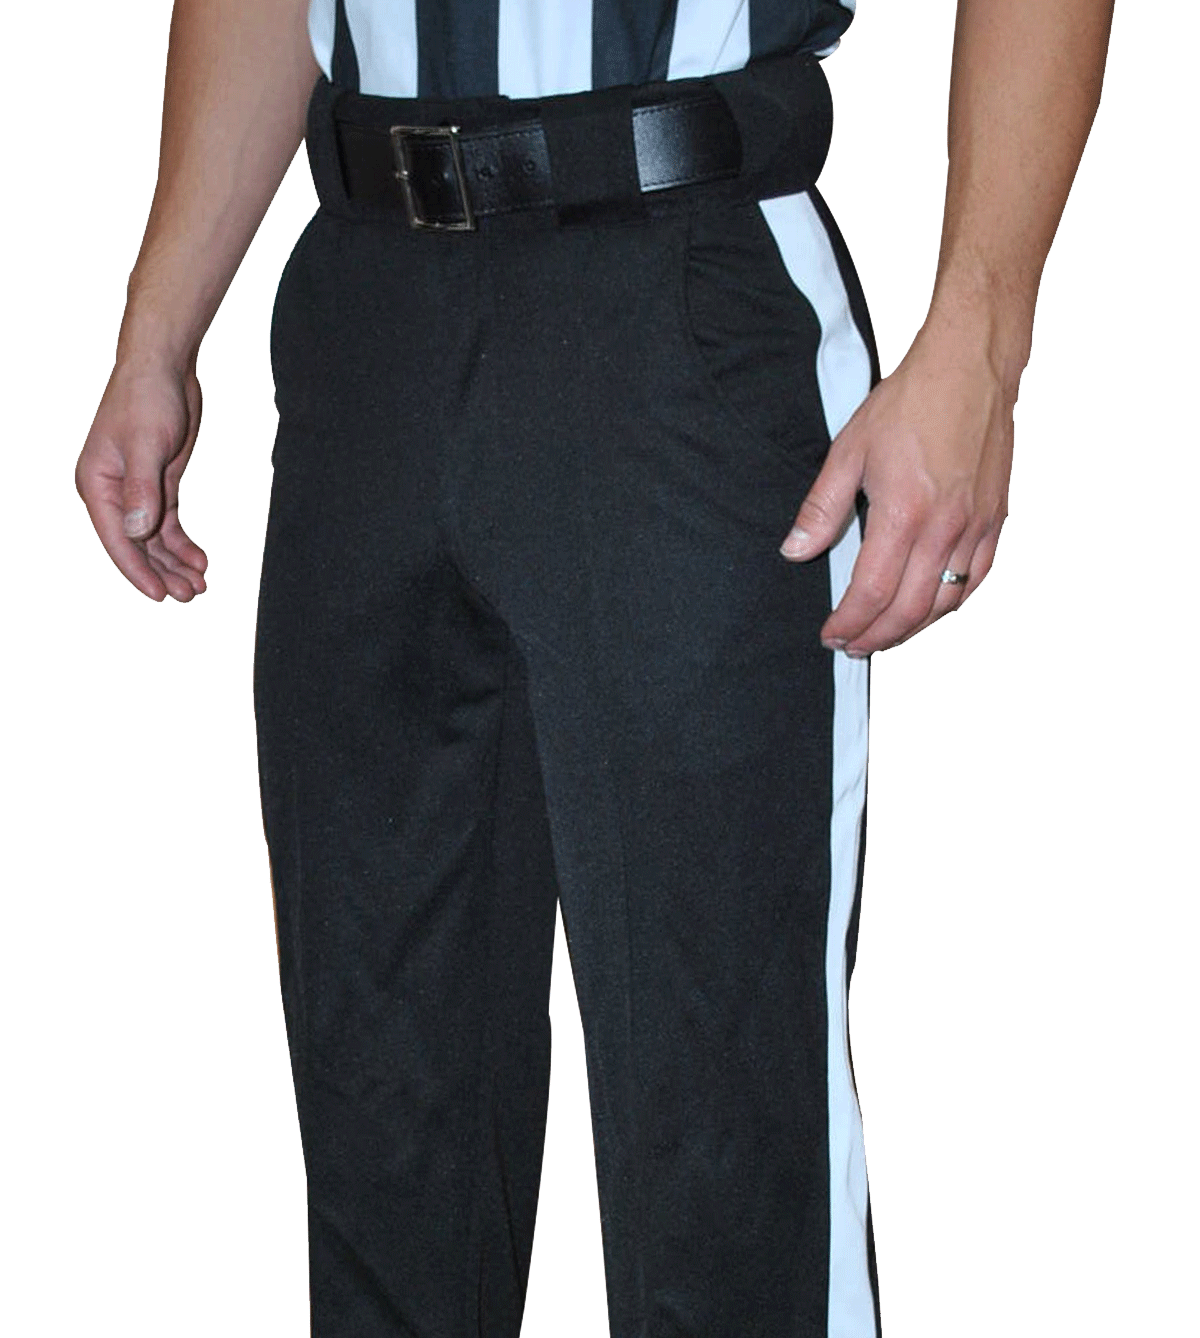 SMITTY Black Foul-Weather Officials Pants